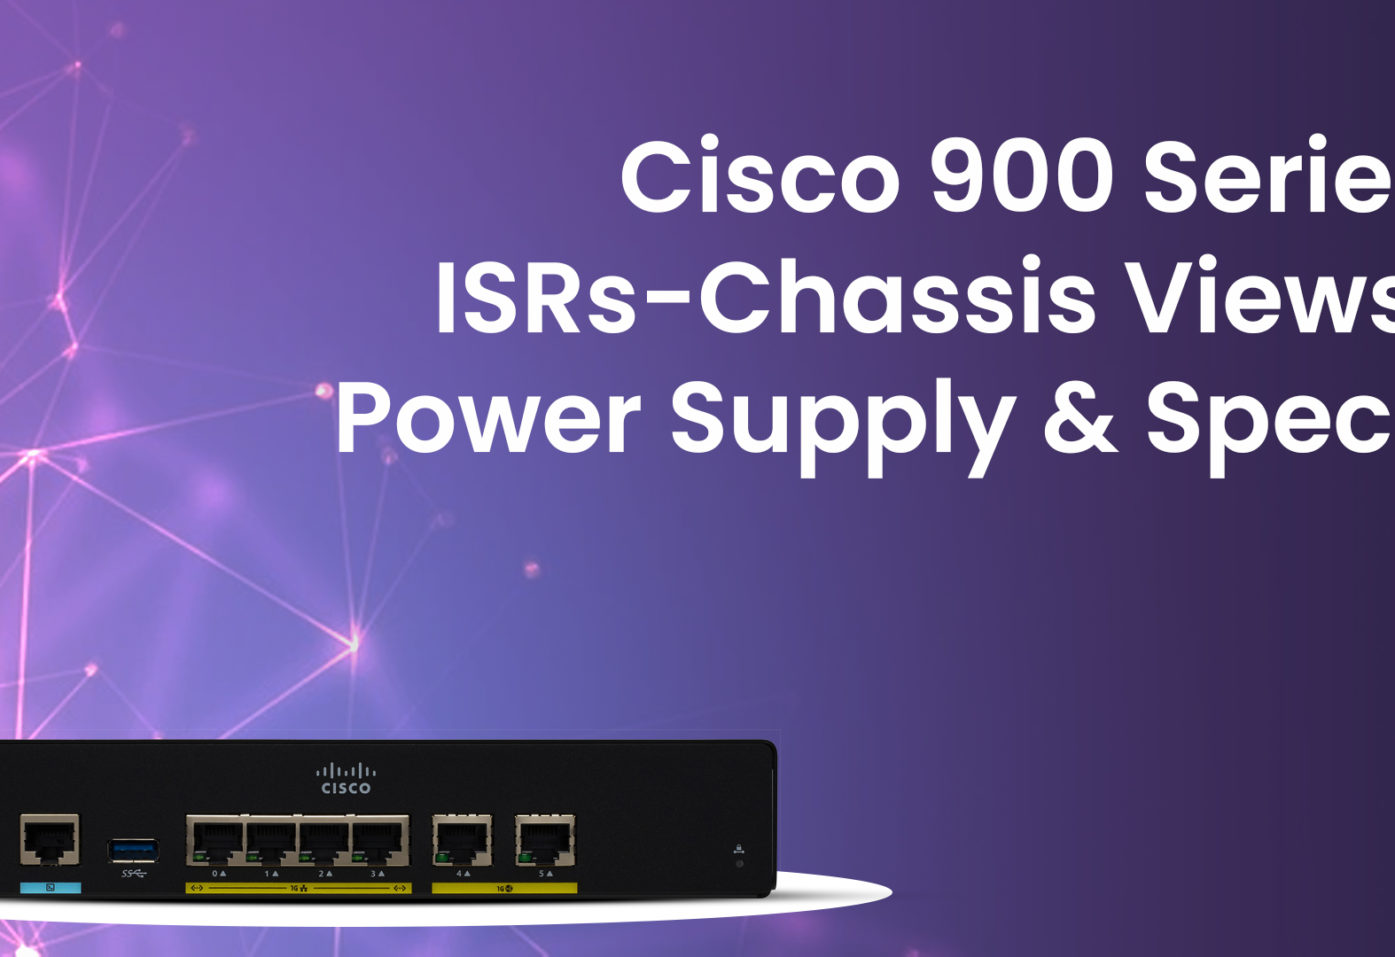 Cisco 900 Series ISRs-Chassis Views, Power Supply and Specs